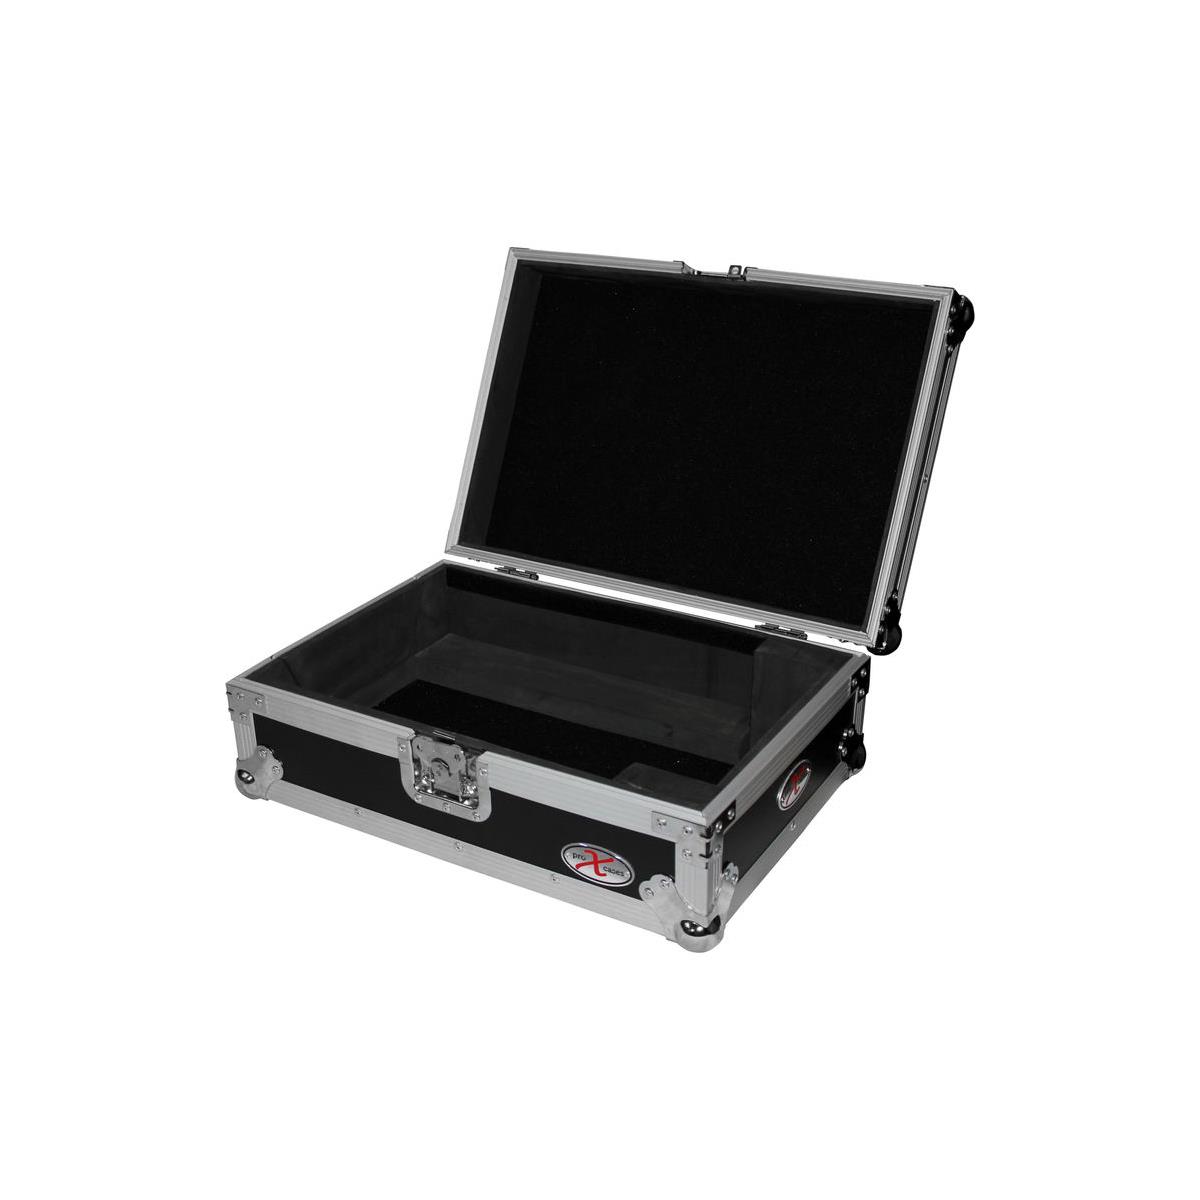 

ProX XS-CD ATA Flight Hard Case for Large Format CD/Media Player, Silver/Black